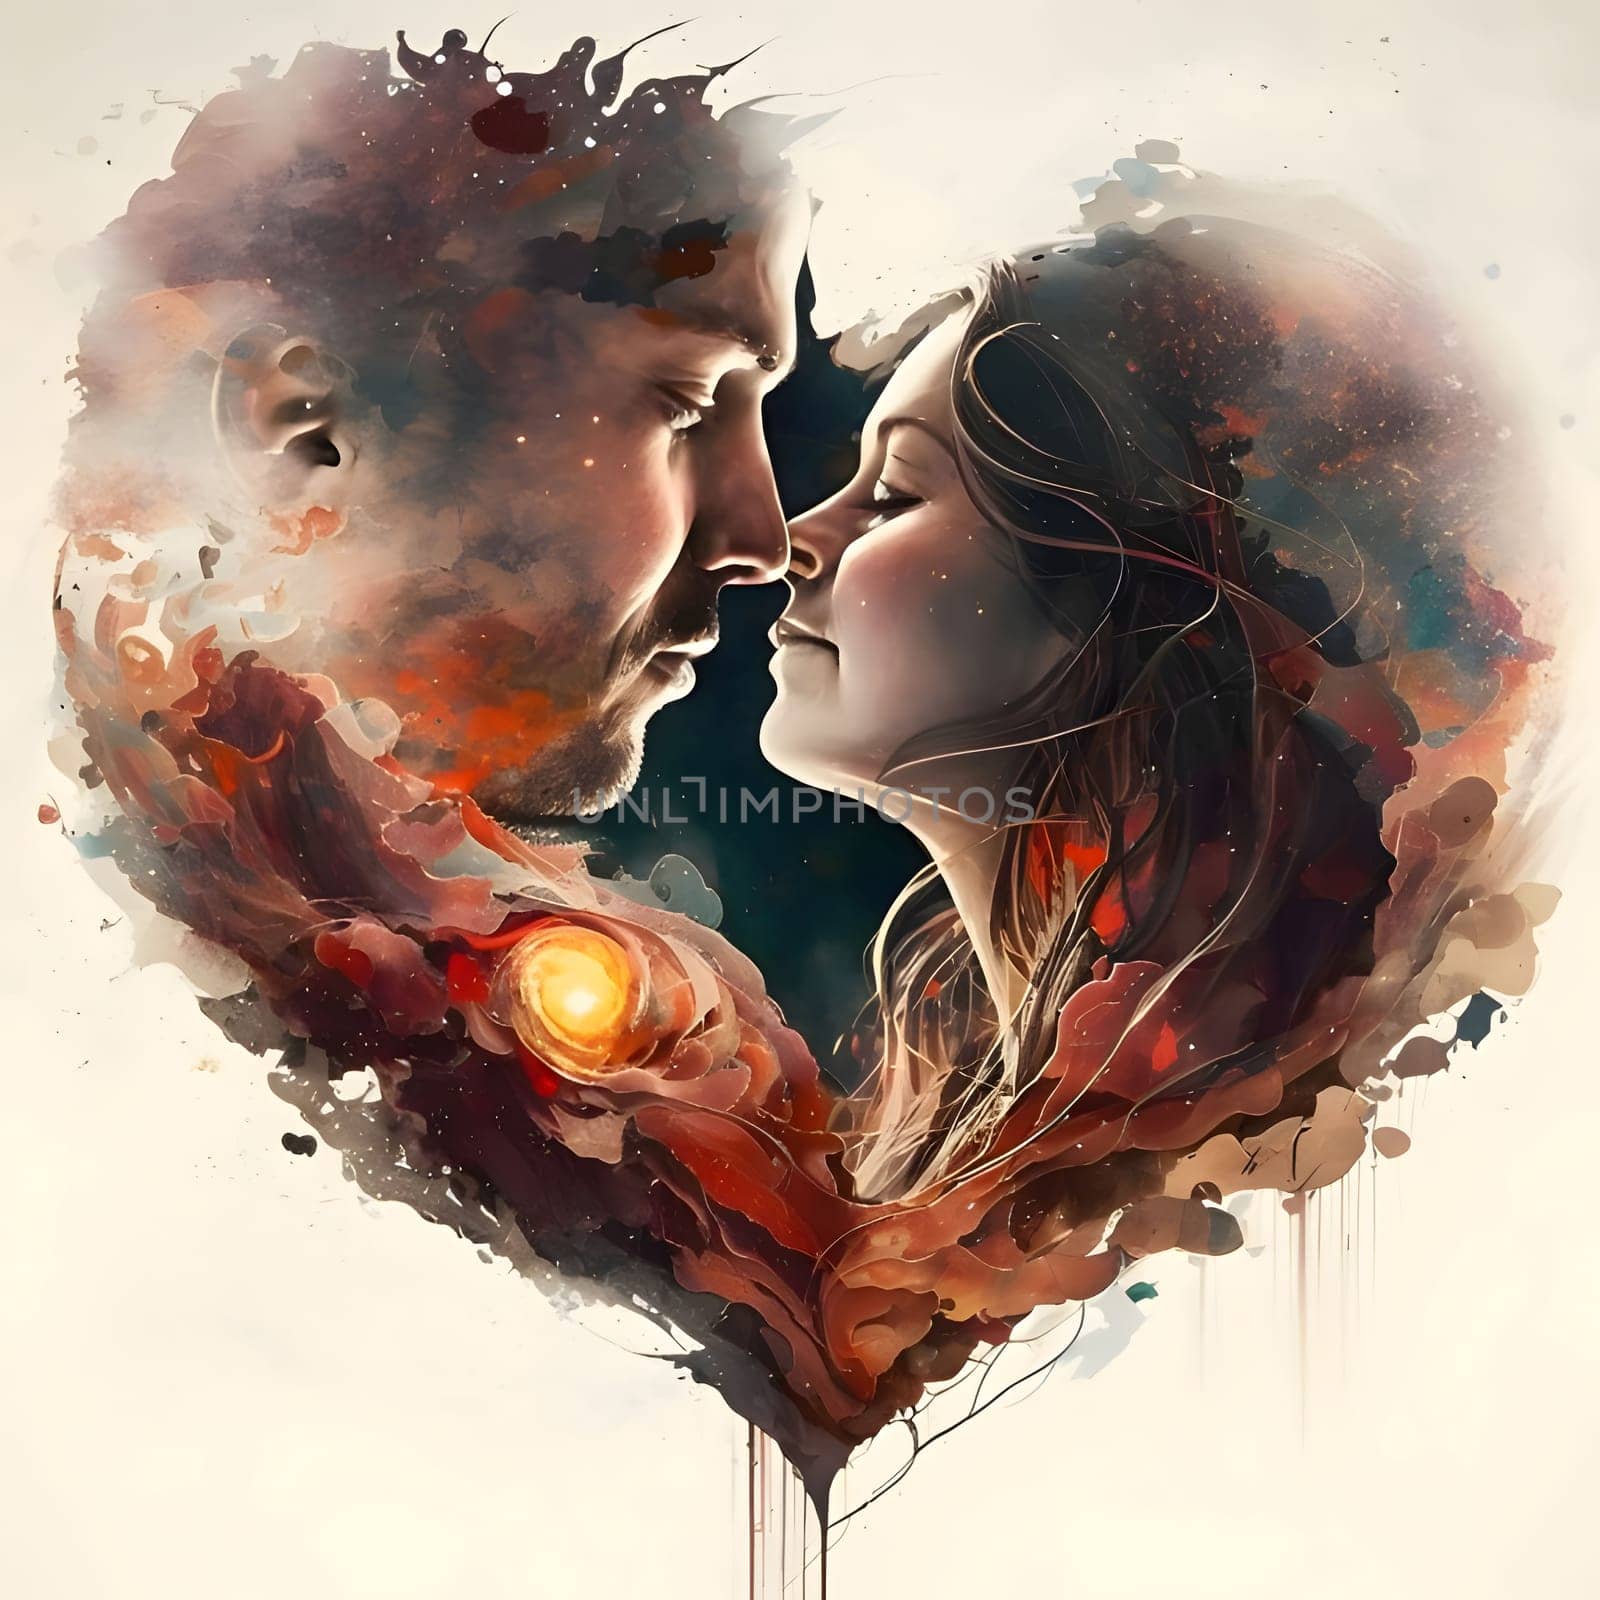 Heart design with a man and woman kissing on a white flooded background. Heart as a symbol of affection and love. The time of falling in love and love.